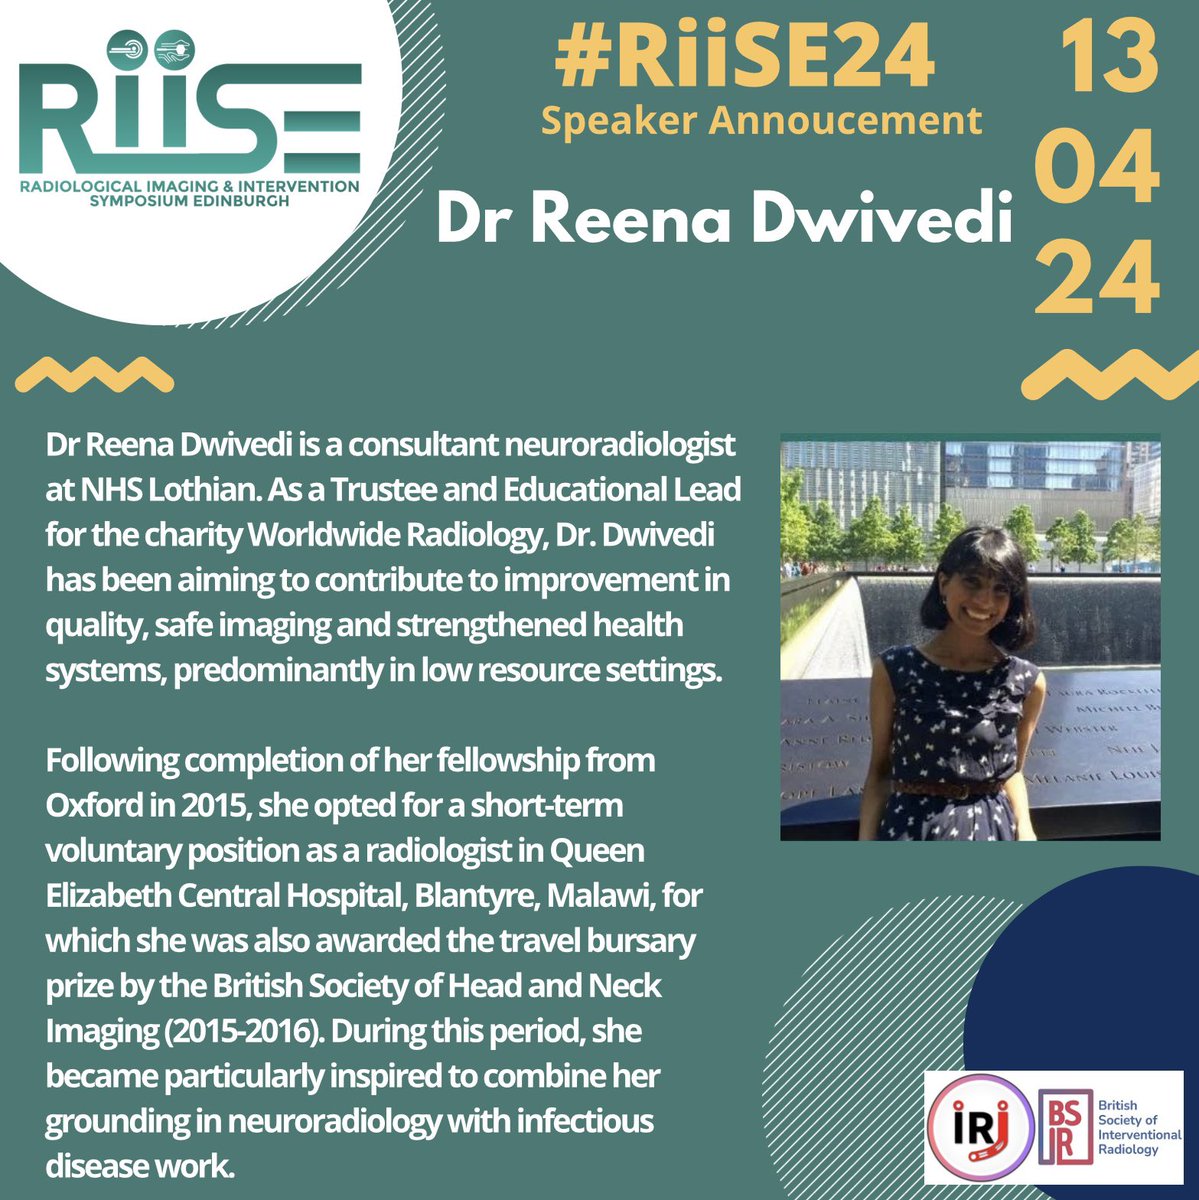 Speaker Announcement #RiiSE